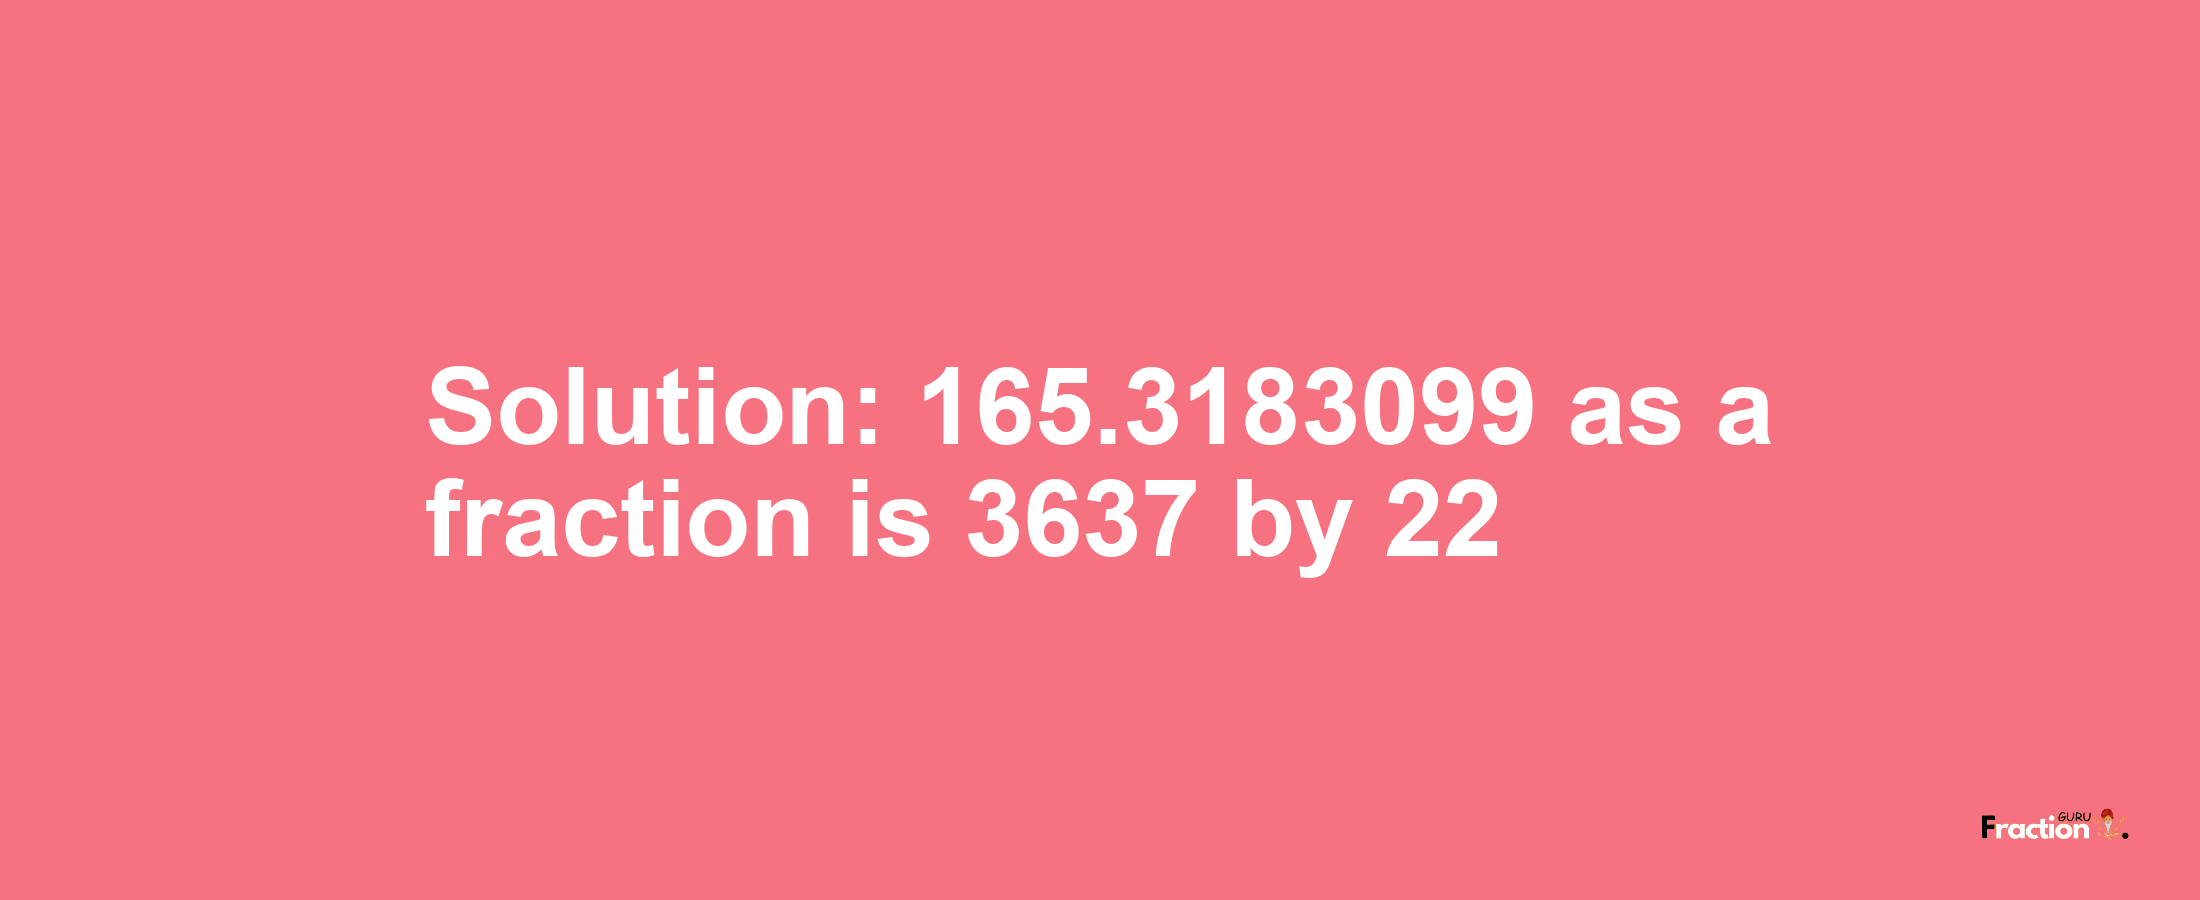 Solution:165.3183099 as a fraction is 3637/22